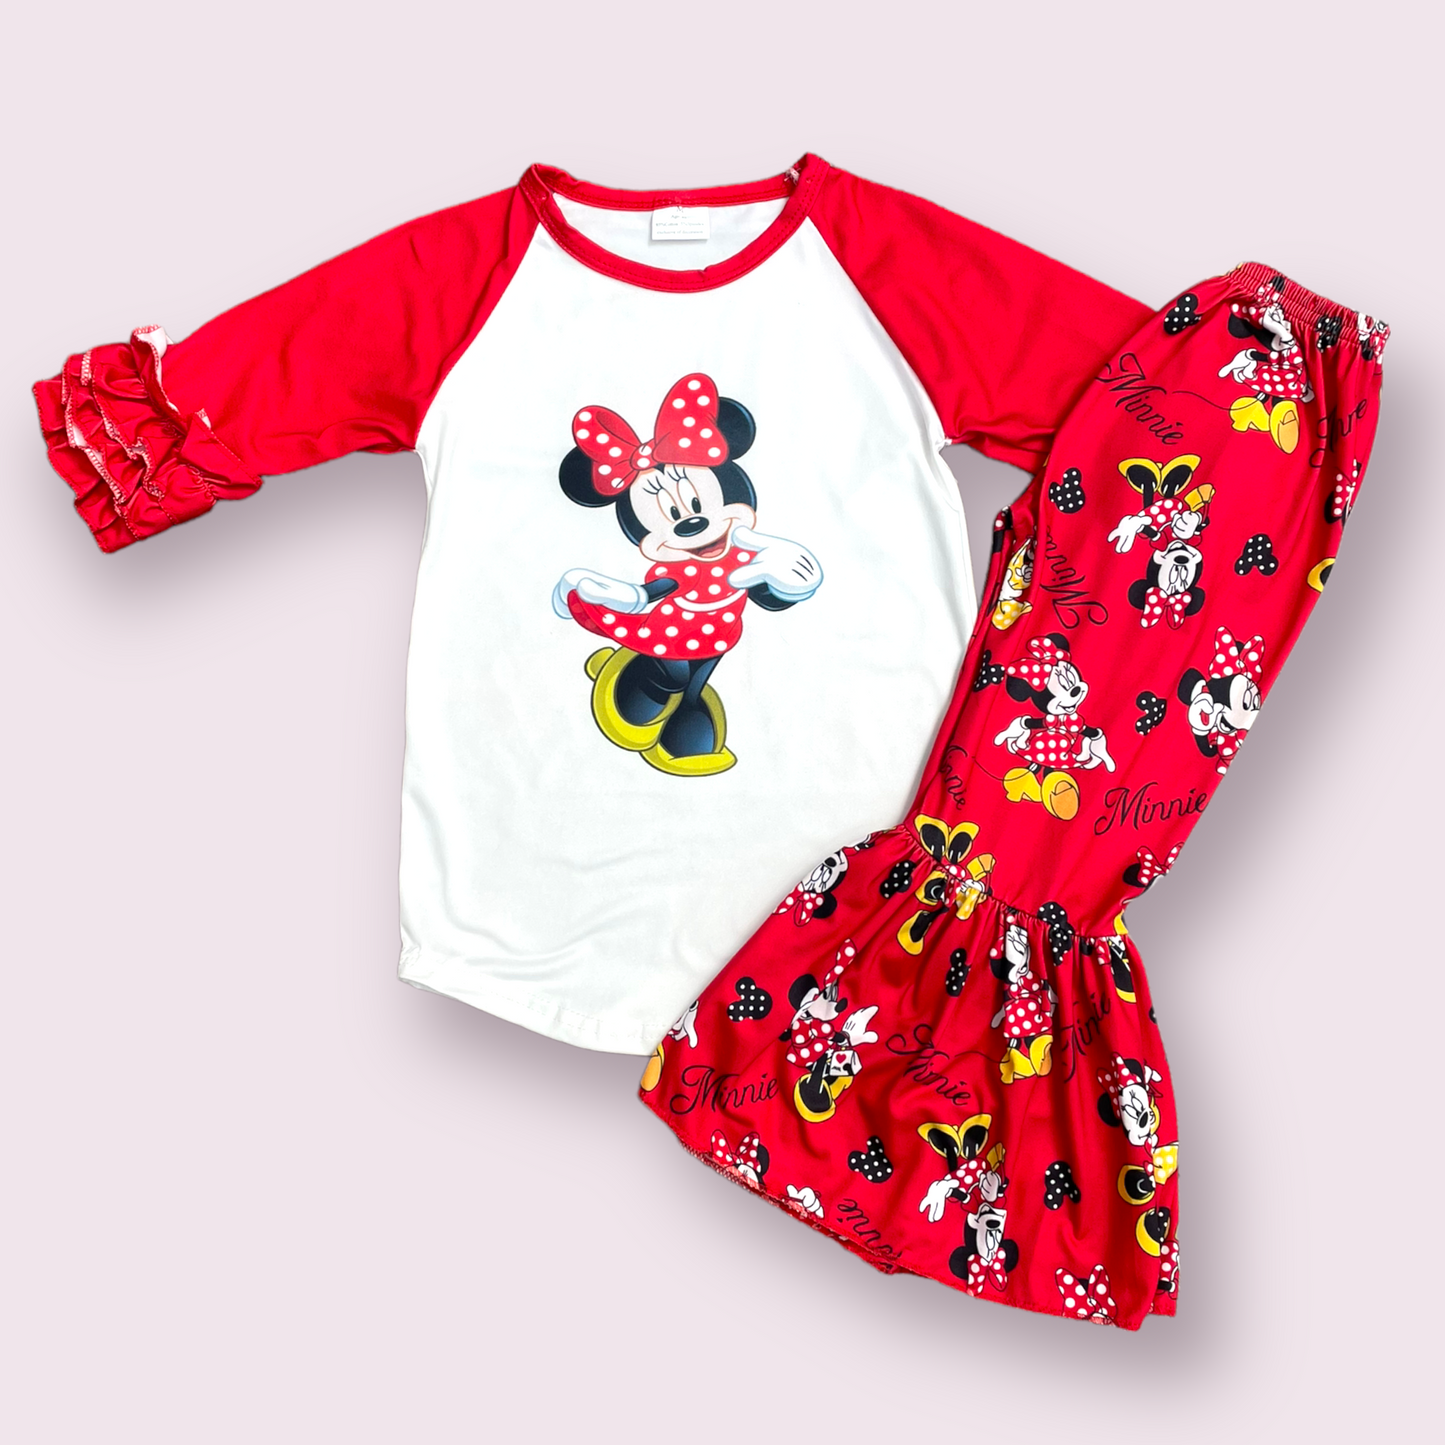 Minnie Outfit